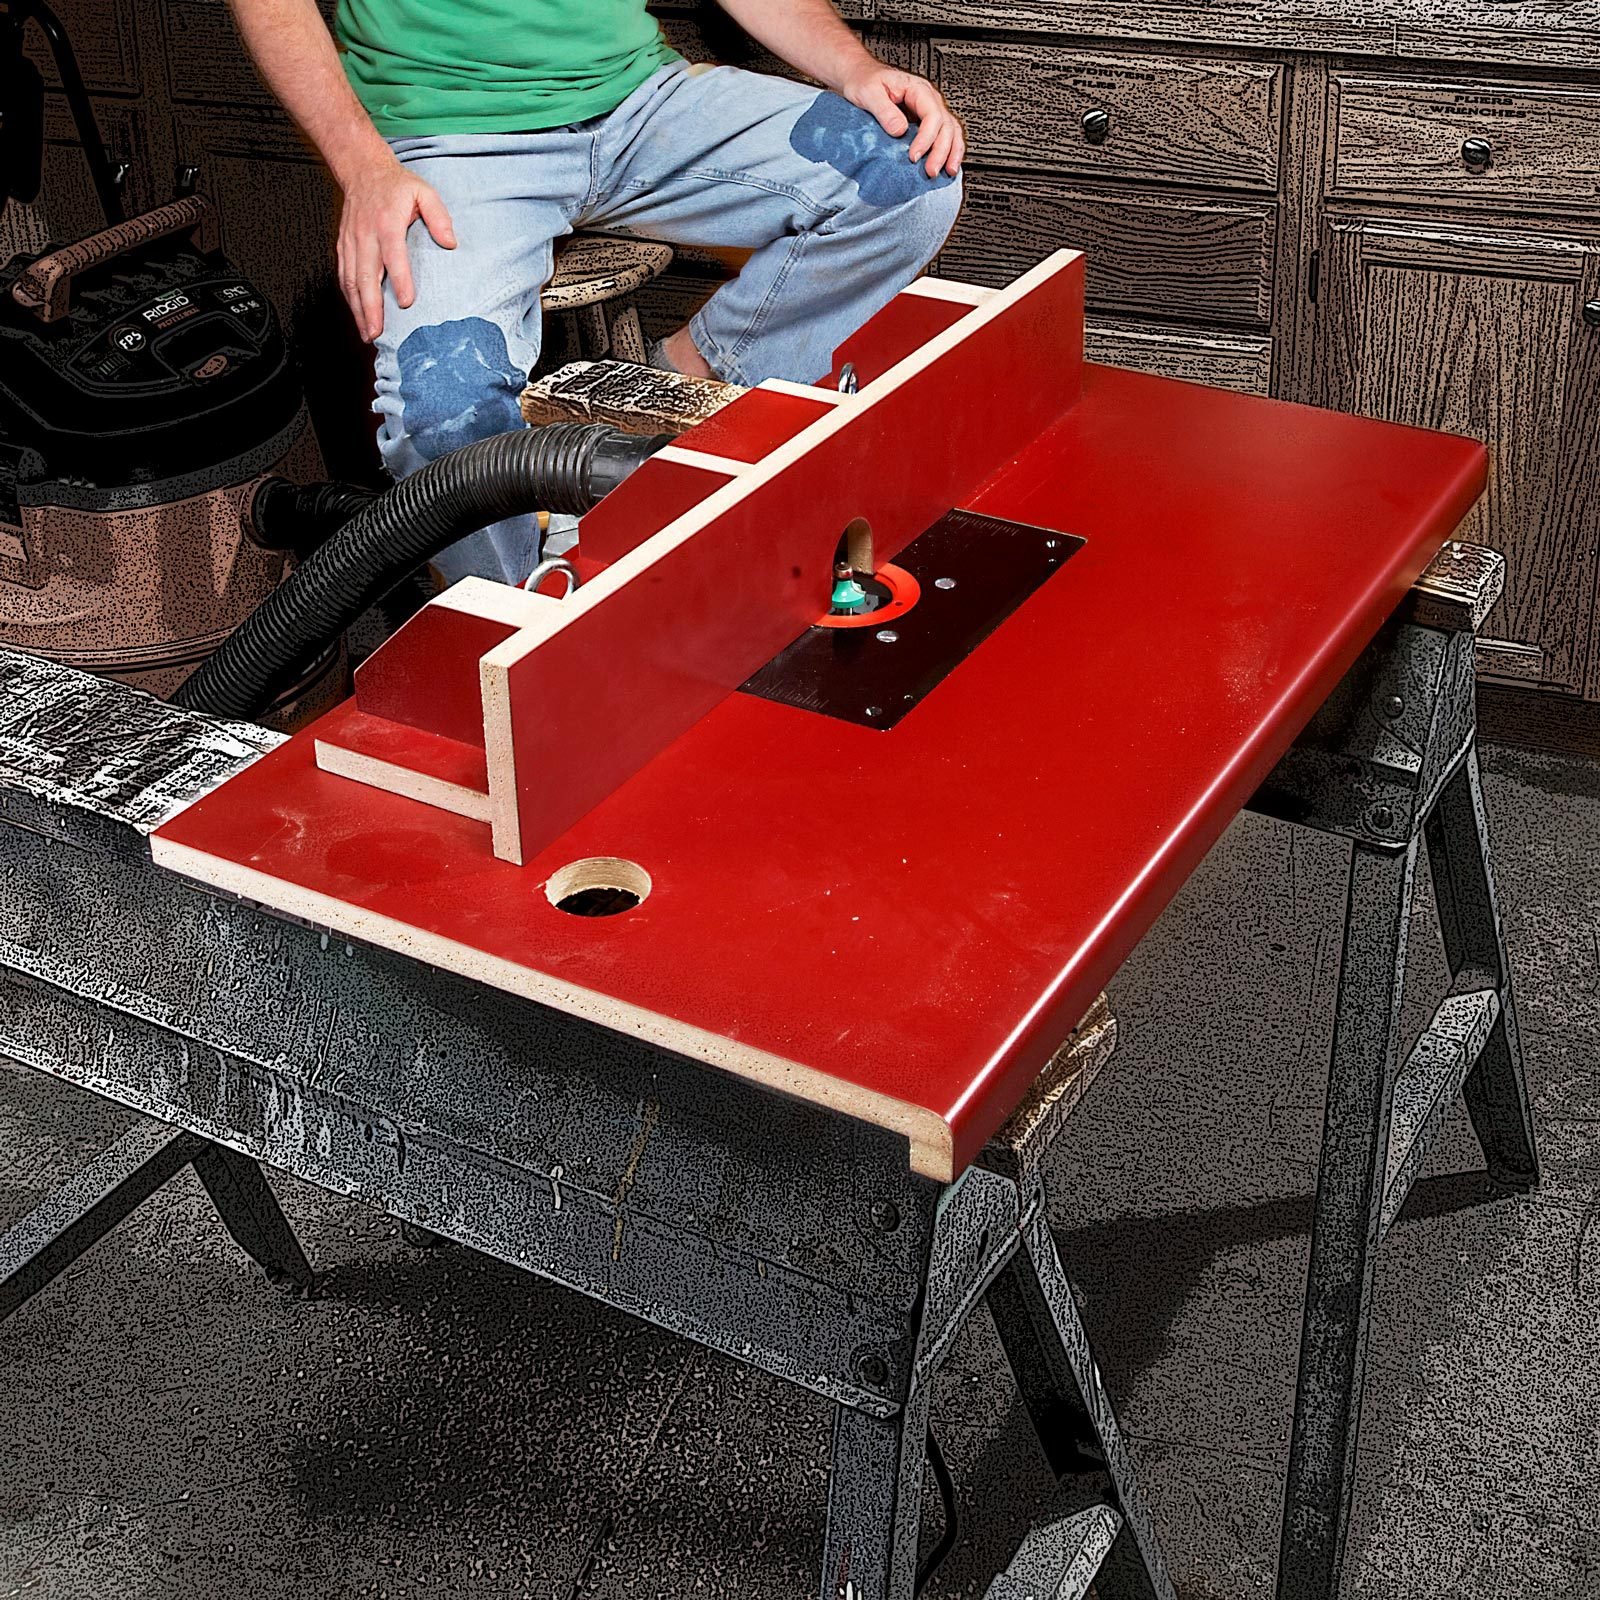 FH11OCT 522 55 053 Build A Router Table By Upcycling A Kitchen Countertop JVcrop ?resize=568,568